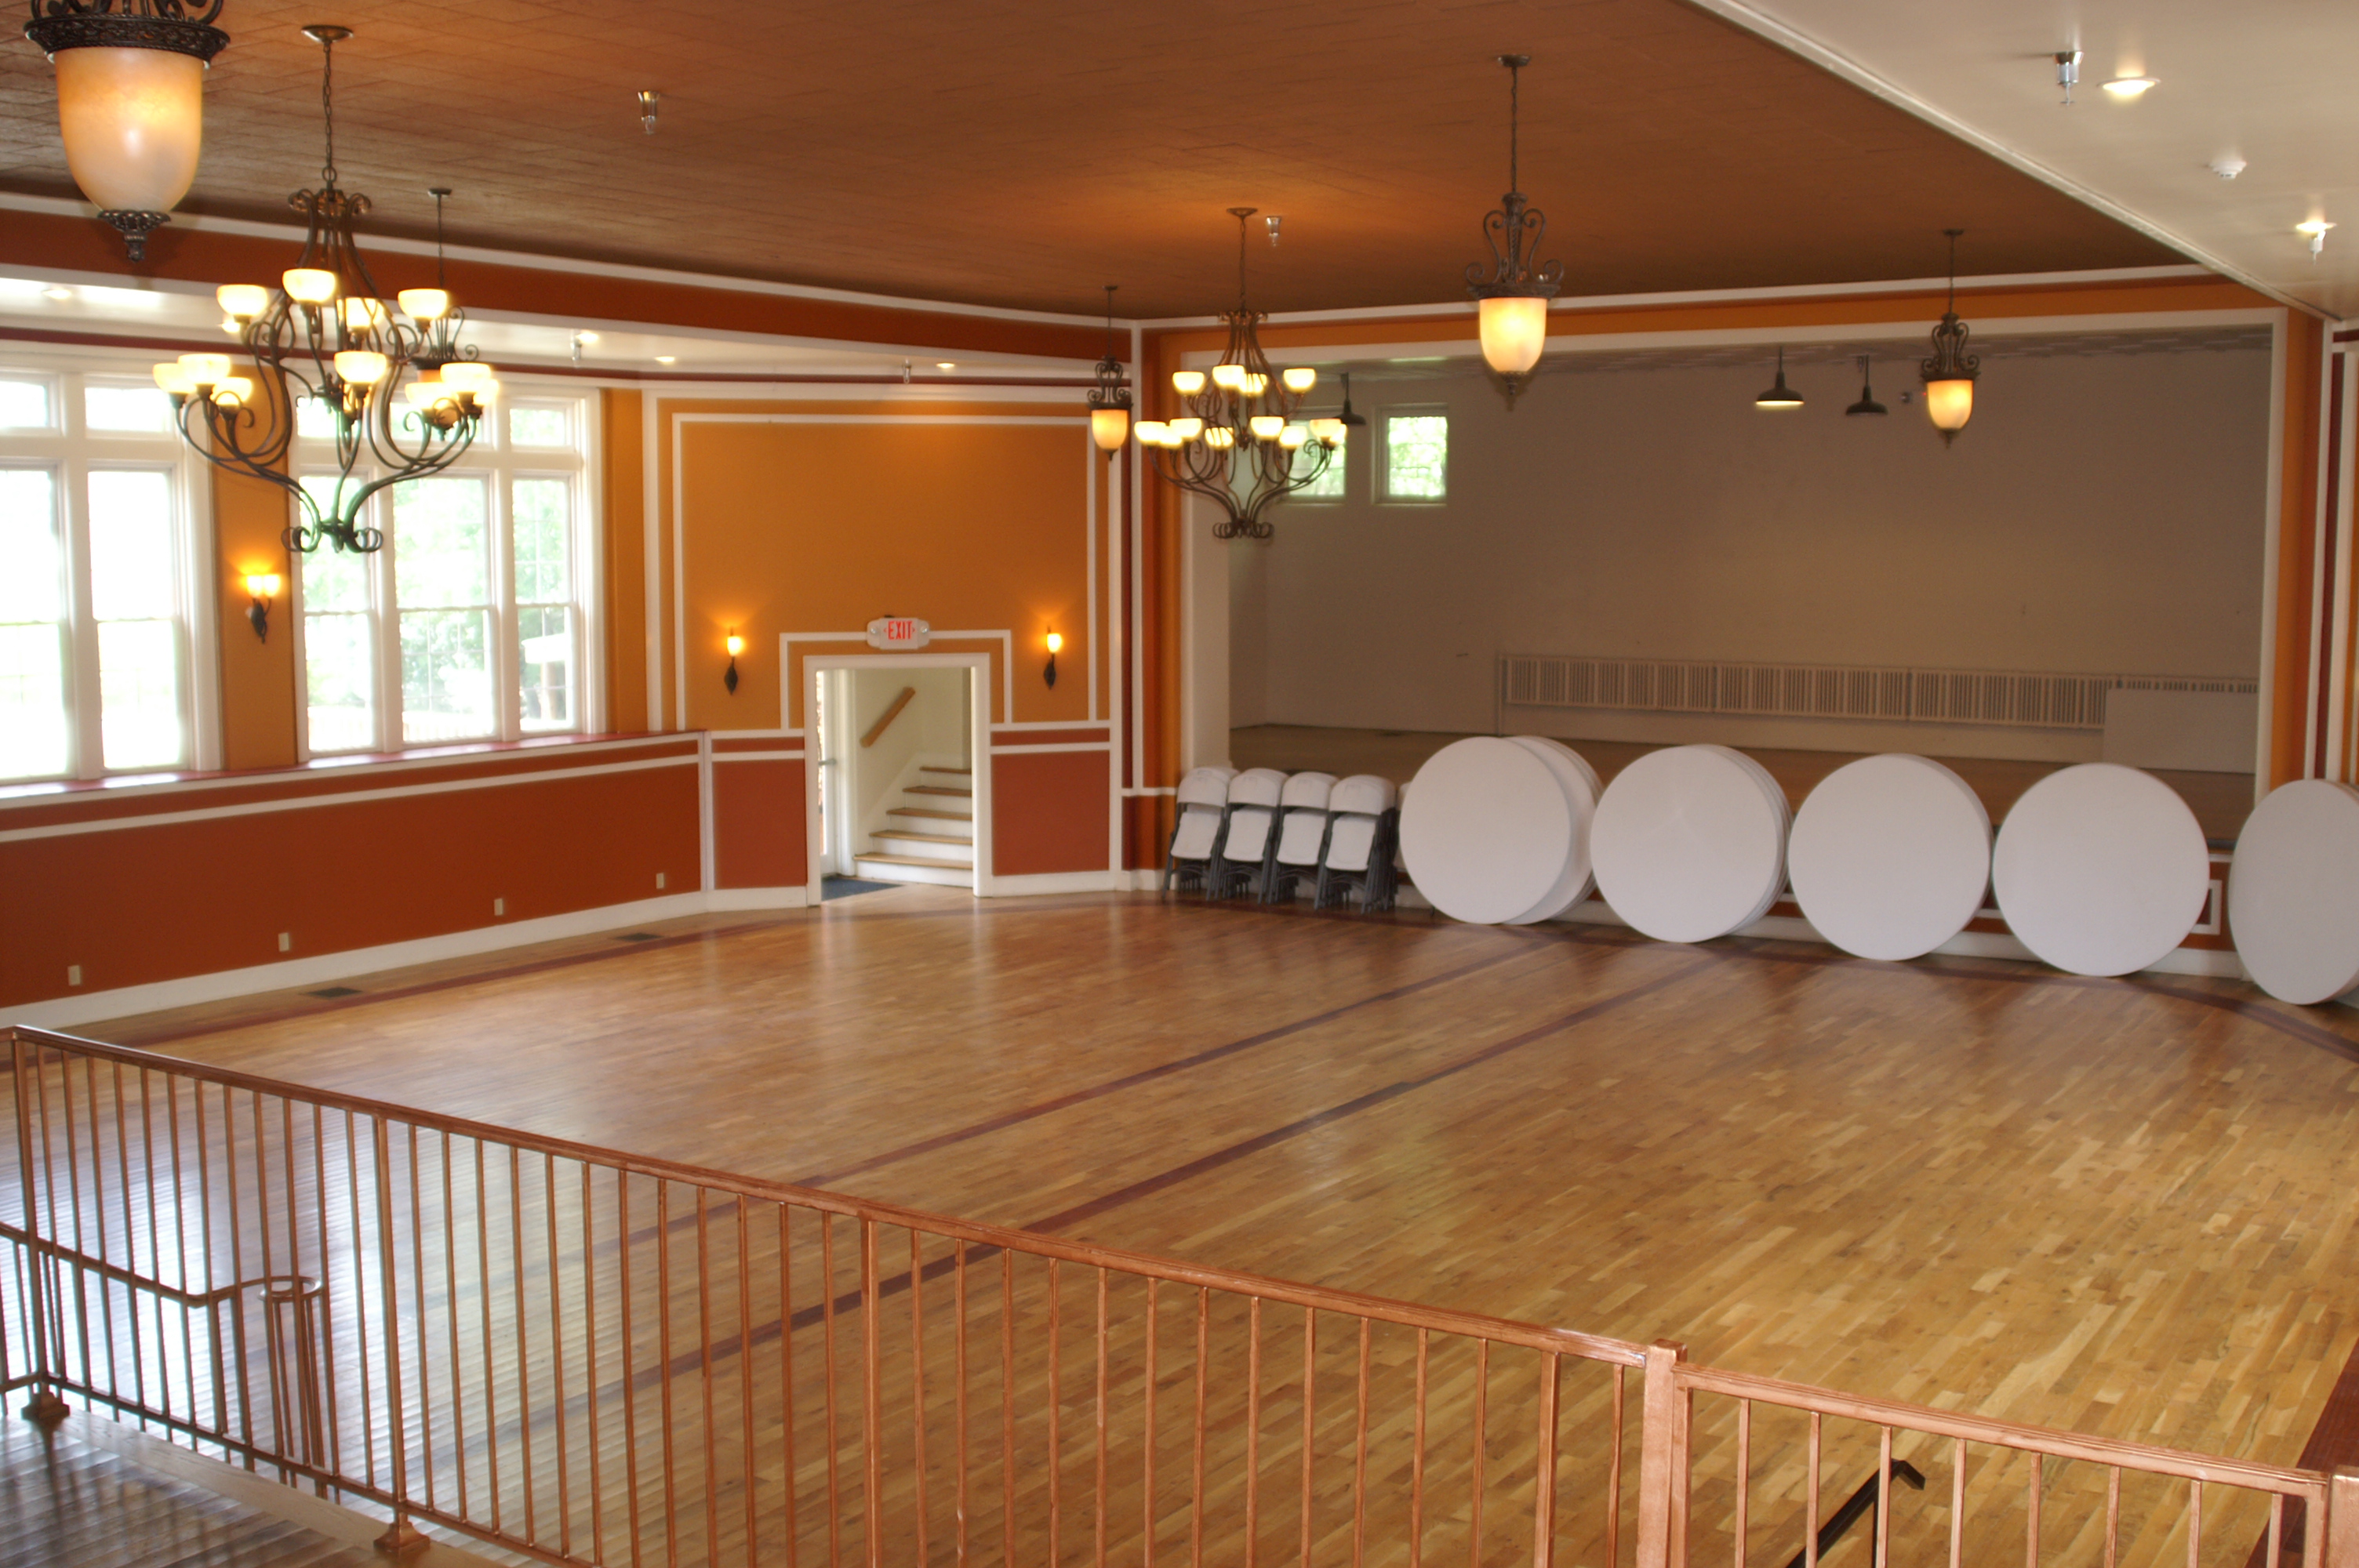 Meeting Hall and Stage